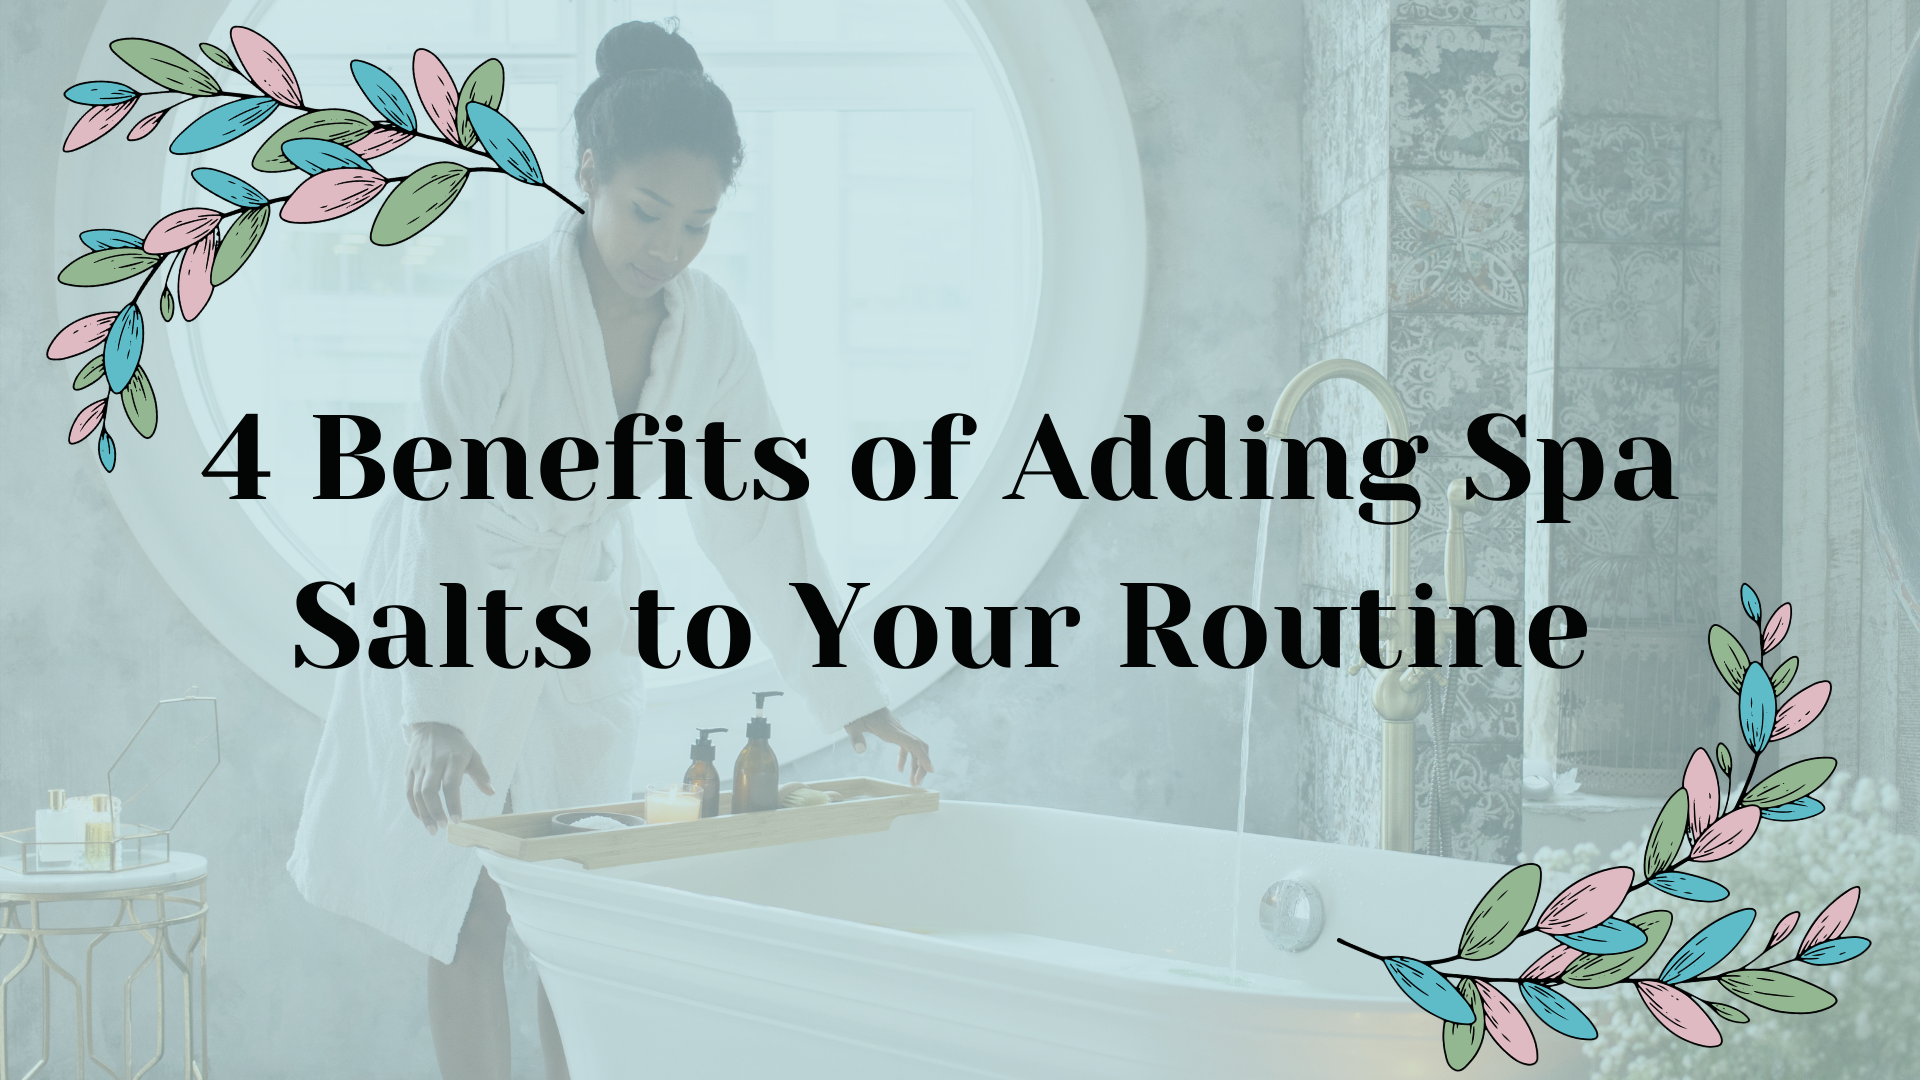 4 Benefits of Adding Spa Salts to Your Routine